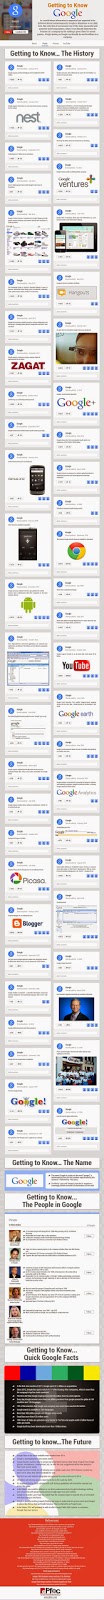 google simplified :giving insight of who what when where of google